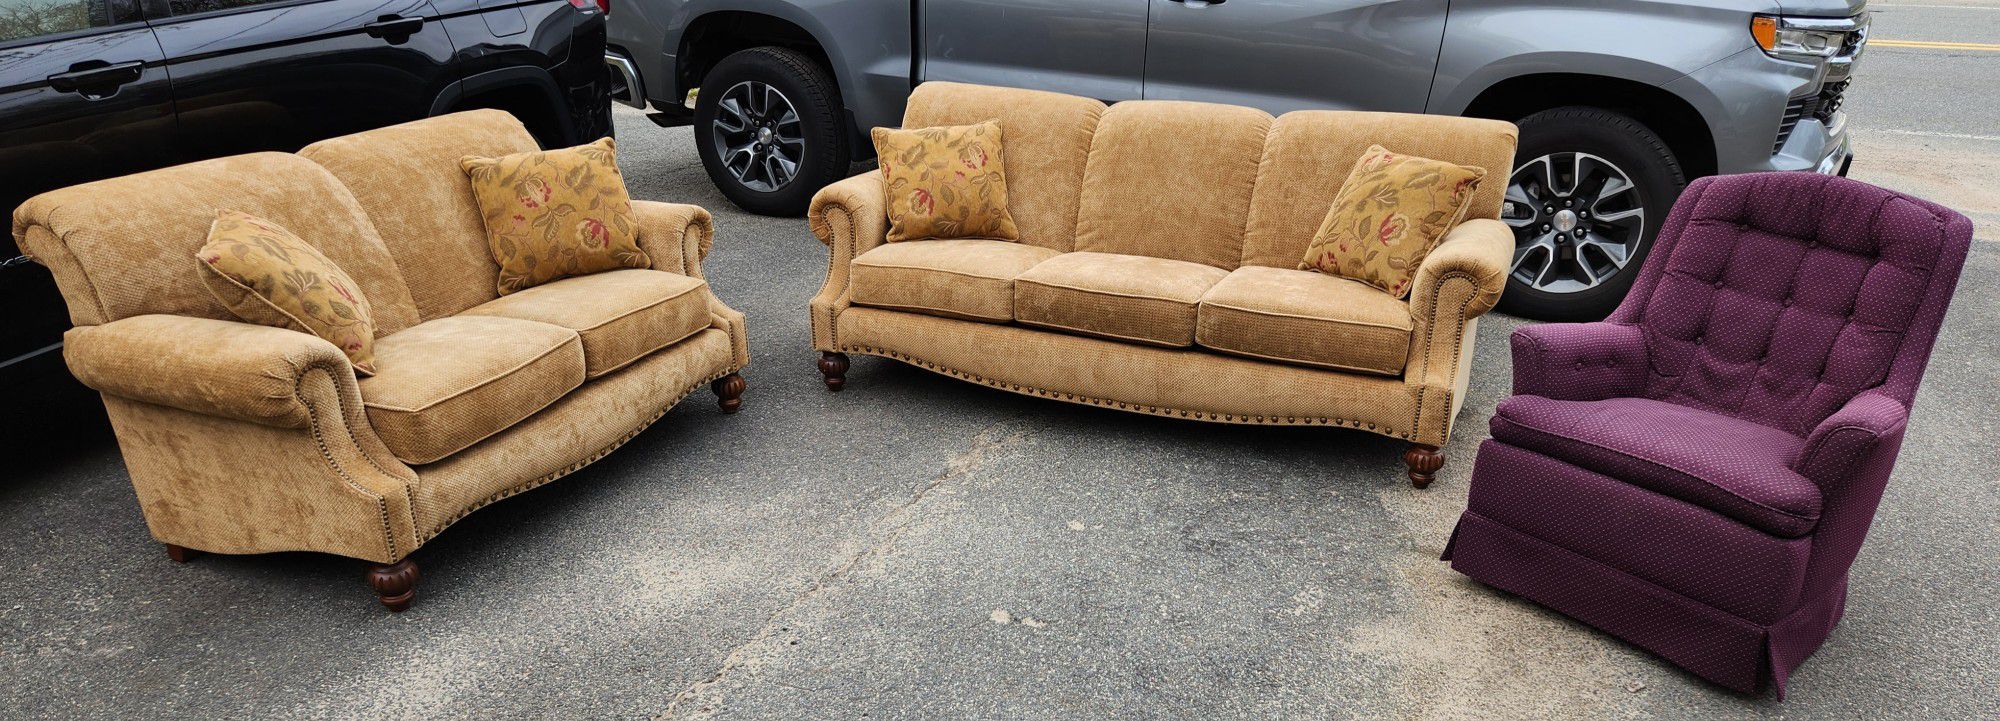 Bernie And Phyl's Living Room Set (Couch, Loveseat, Chair)